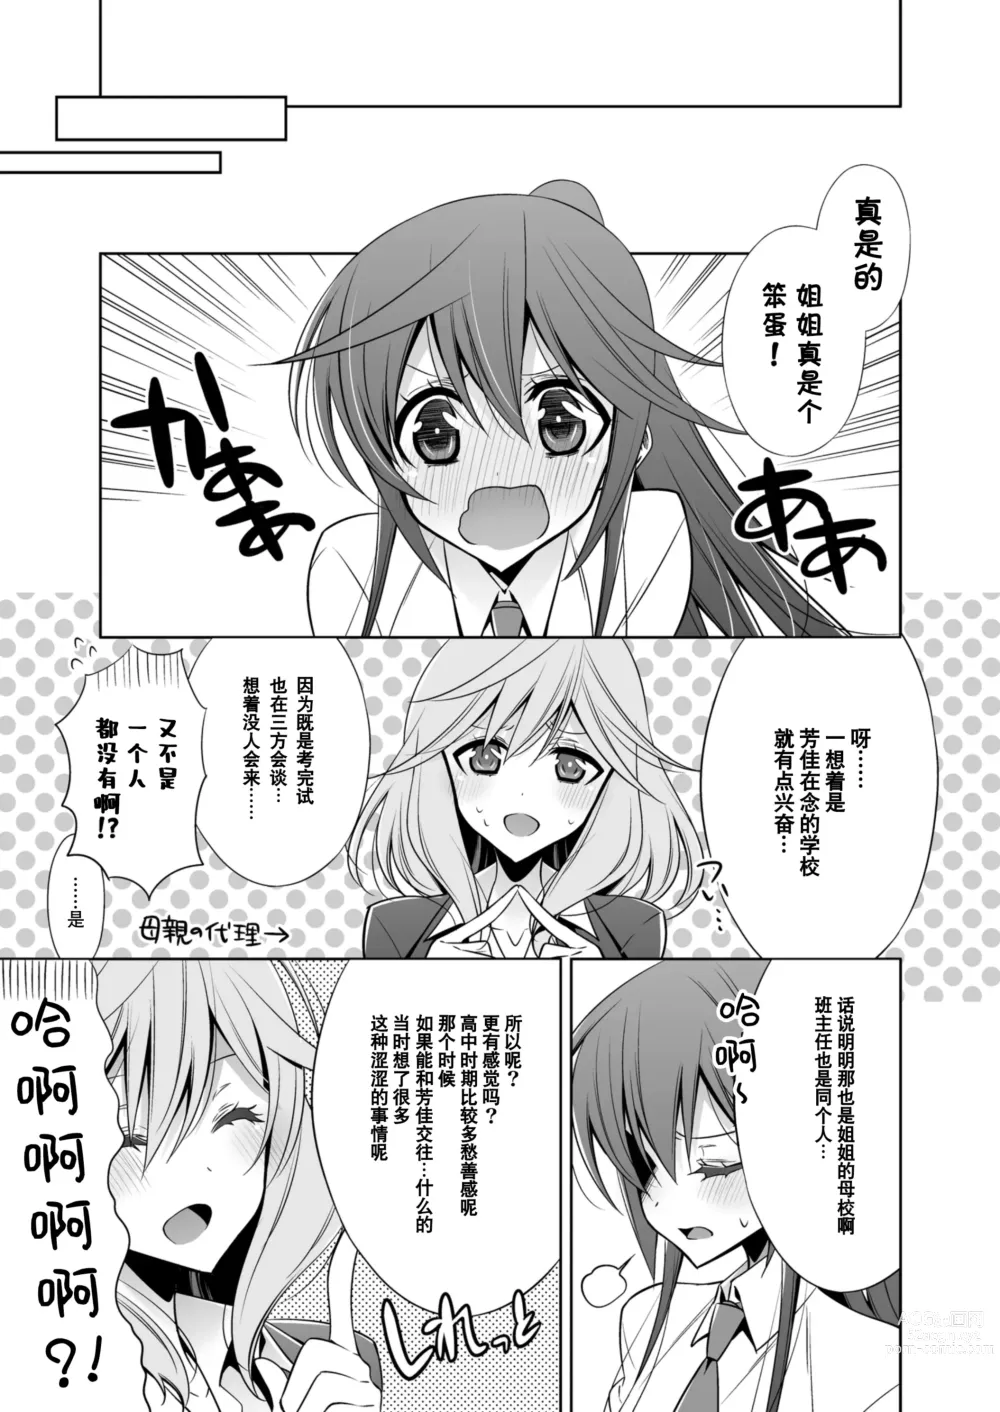 Page 6 of doujinshi 世界上最可爱的人